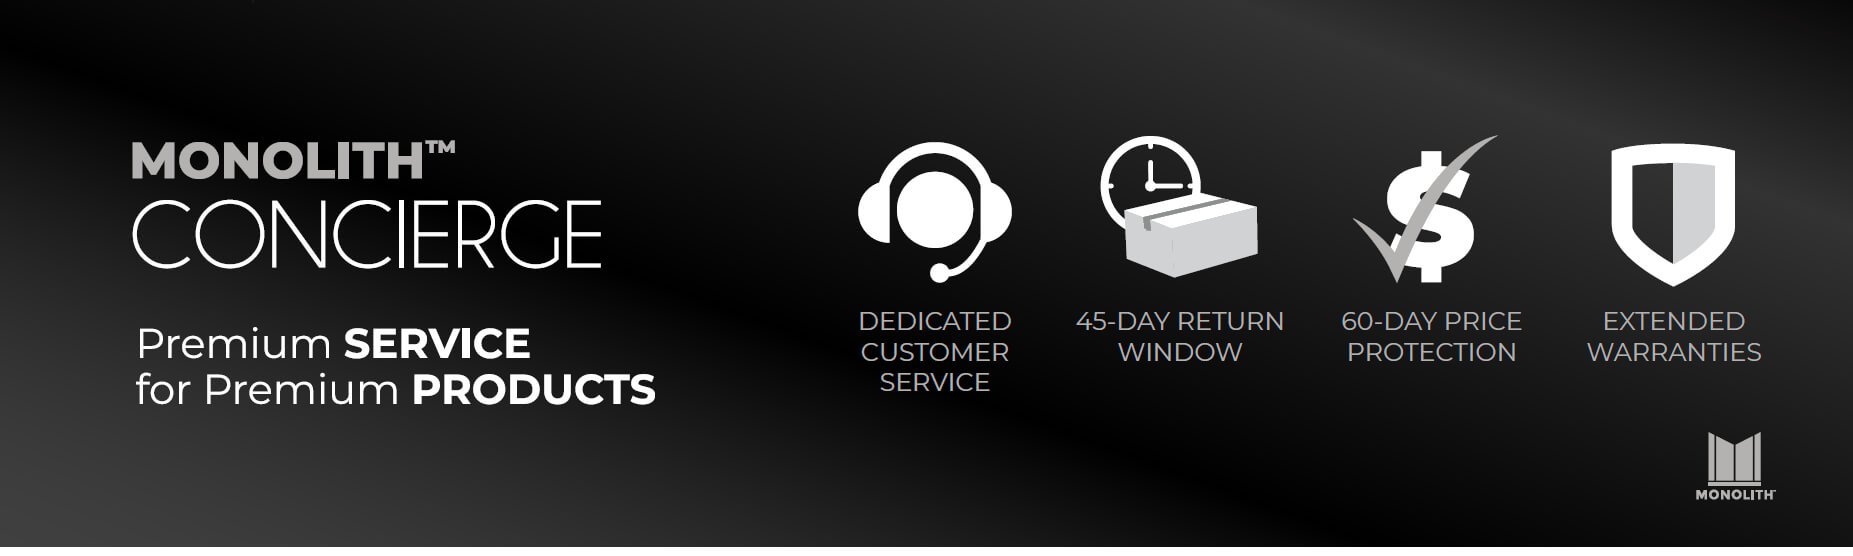 Monolith Concierge. Dedicated Customer Service. 45-Day Return Window. 60-Day Price Protection. Extended Warranties.